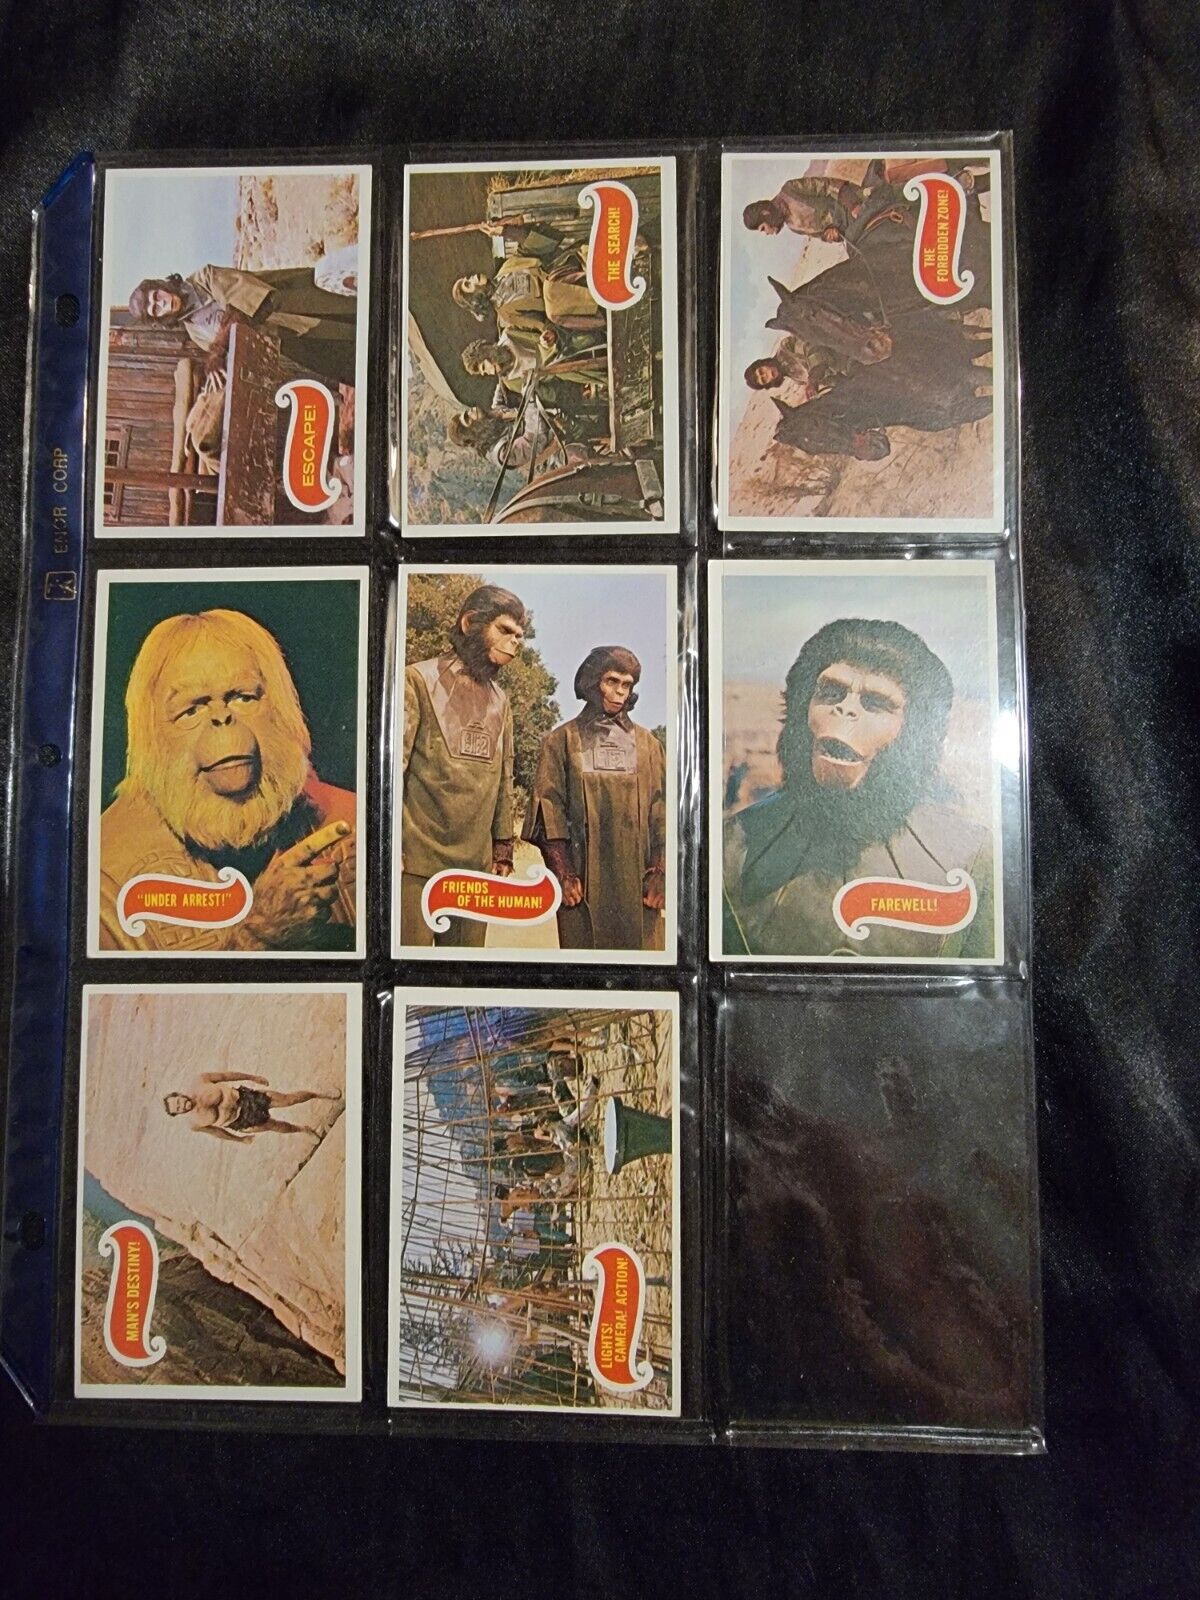 1967 Planet Of The Apes TV Series Trading Cards Full Collection Of 44 Cards